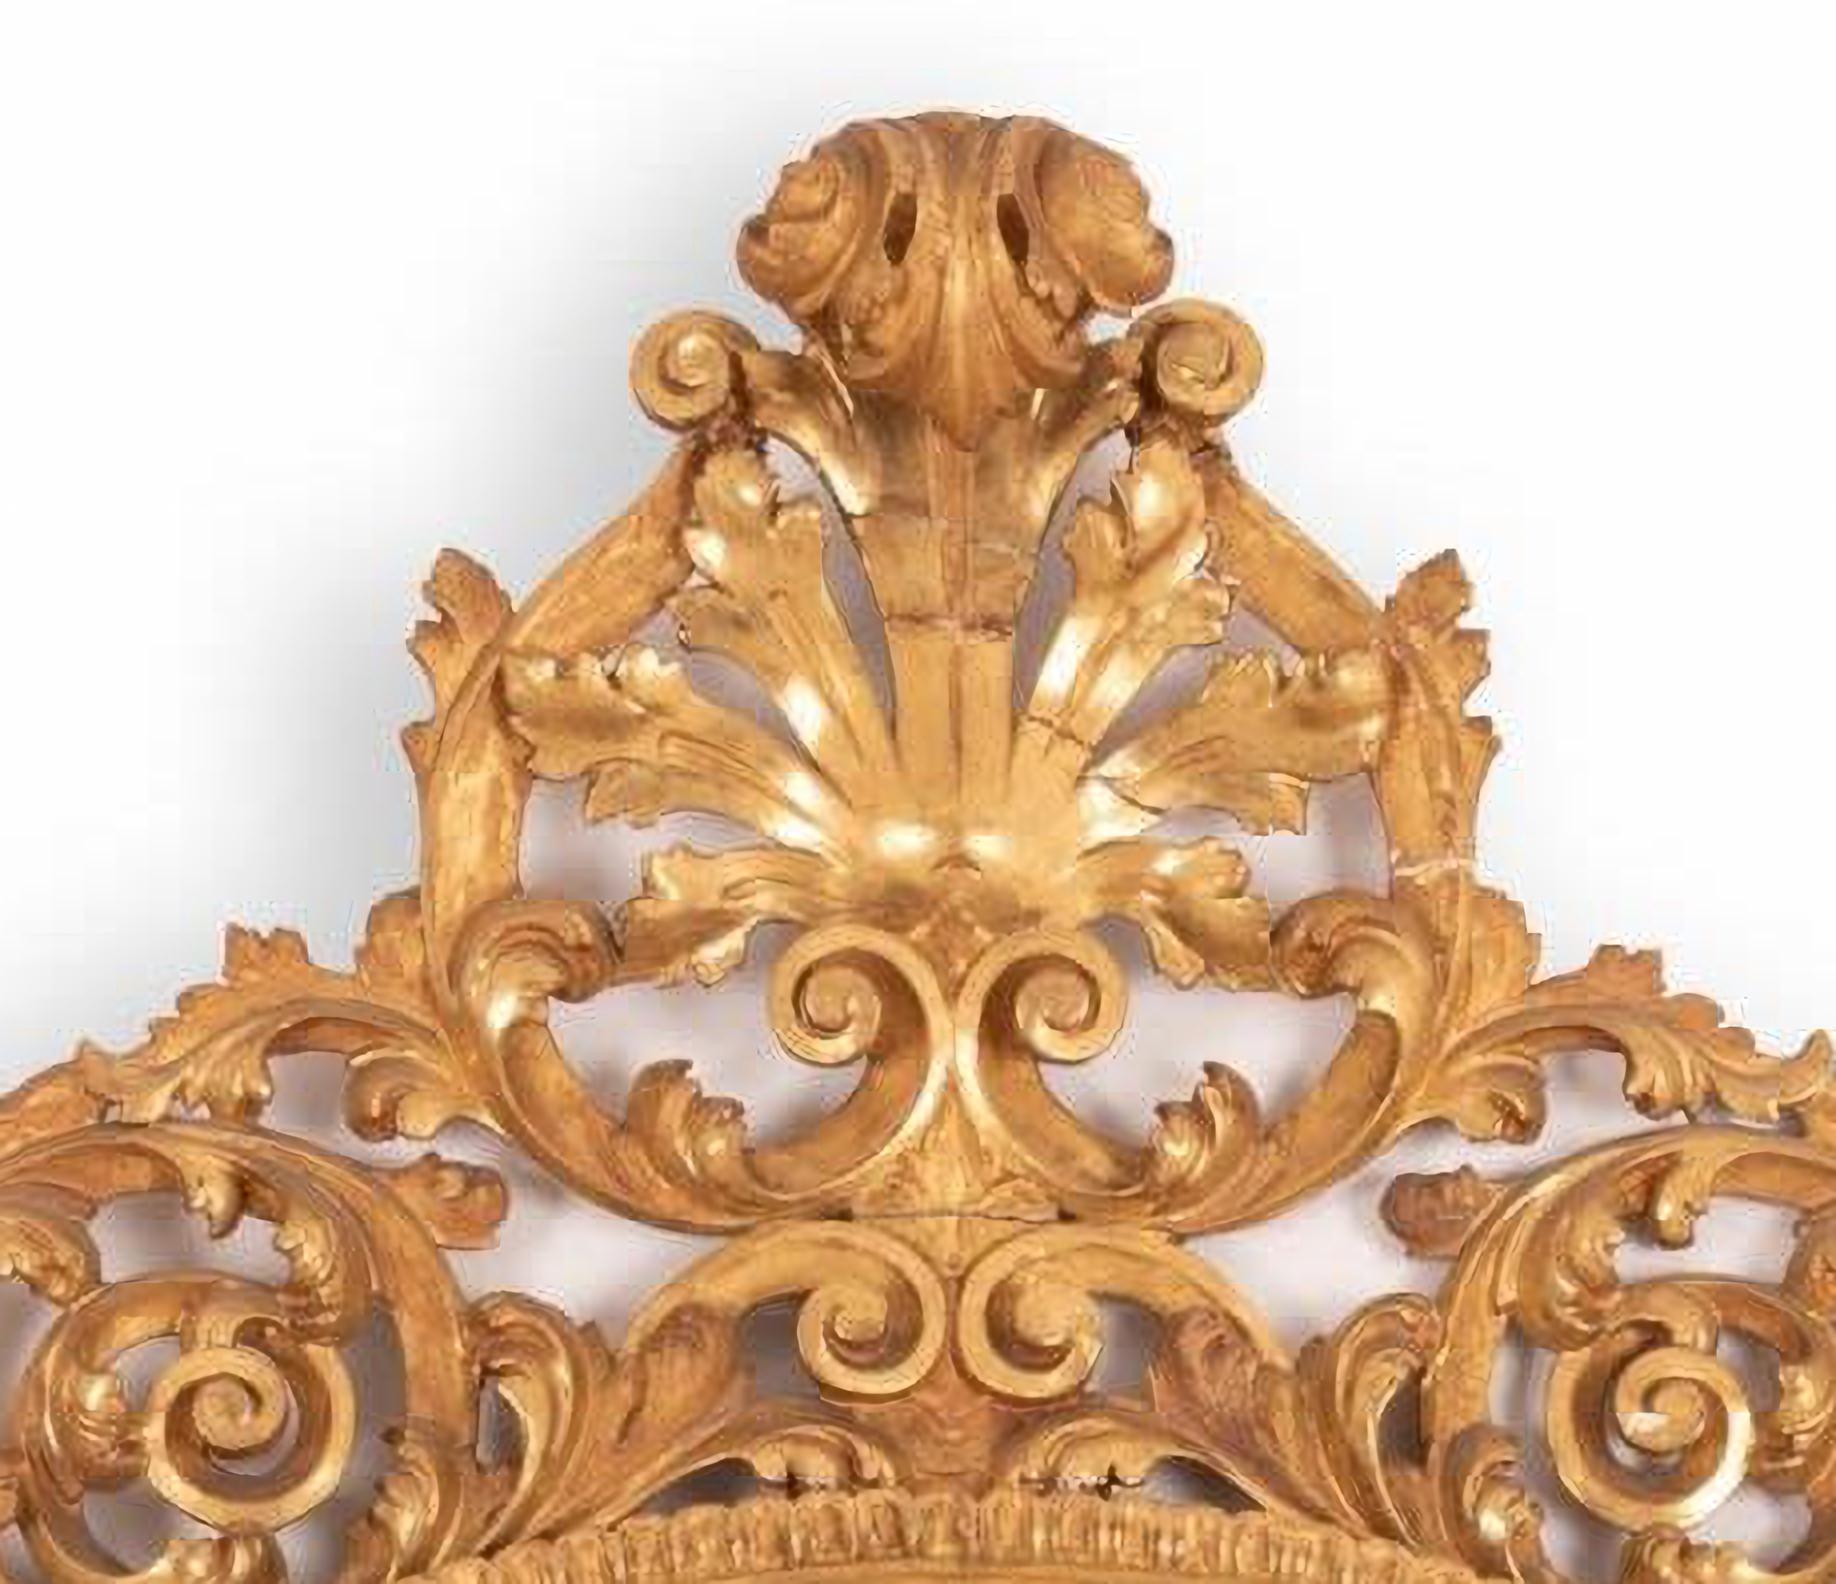 Large 18th century Italian mirror.
poded in carved and gilded wood.
Measures: 230cm x 150cm.
Good conditions.